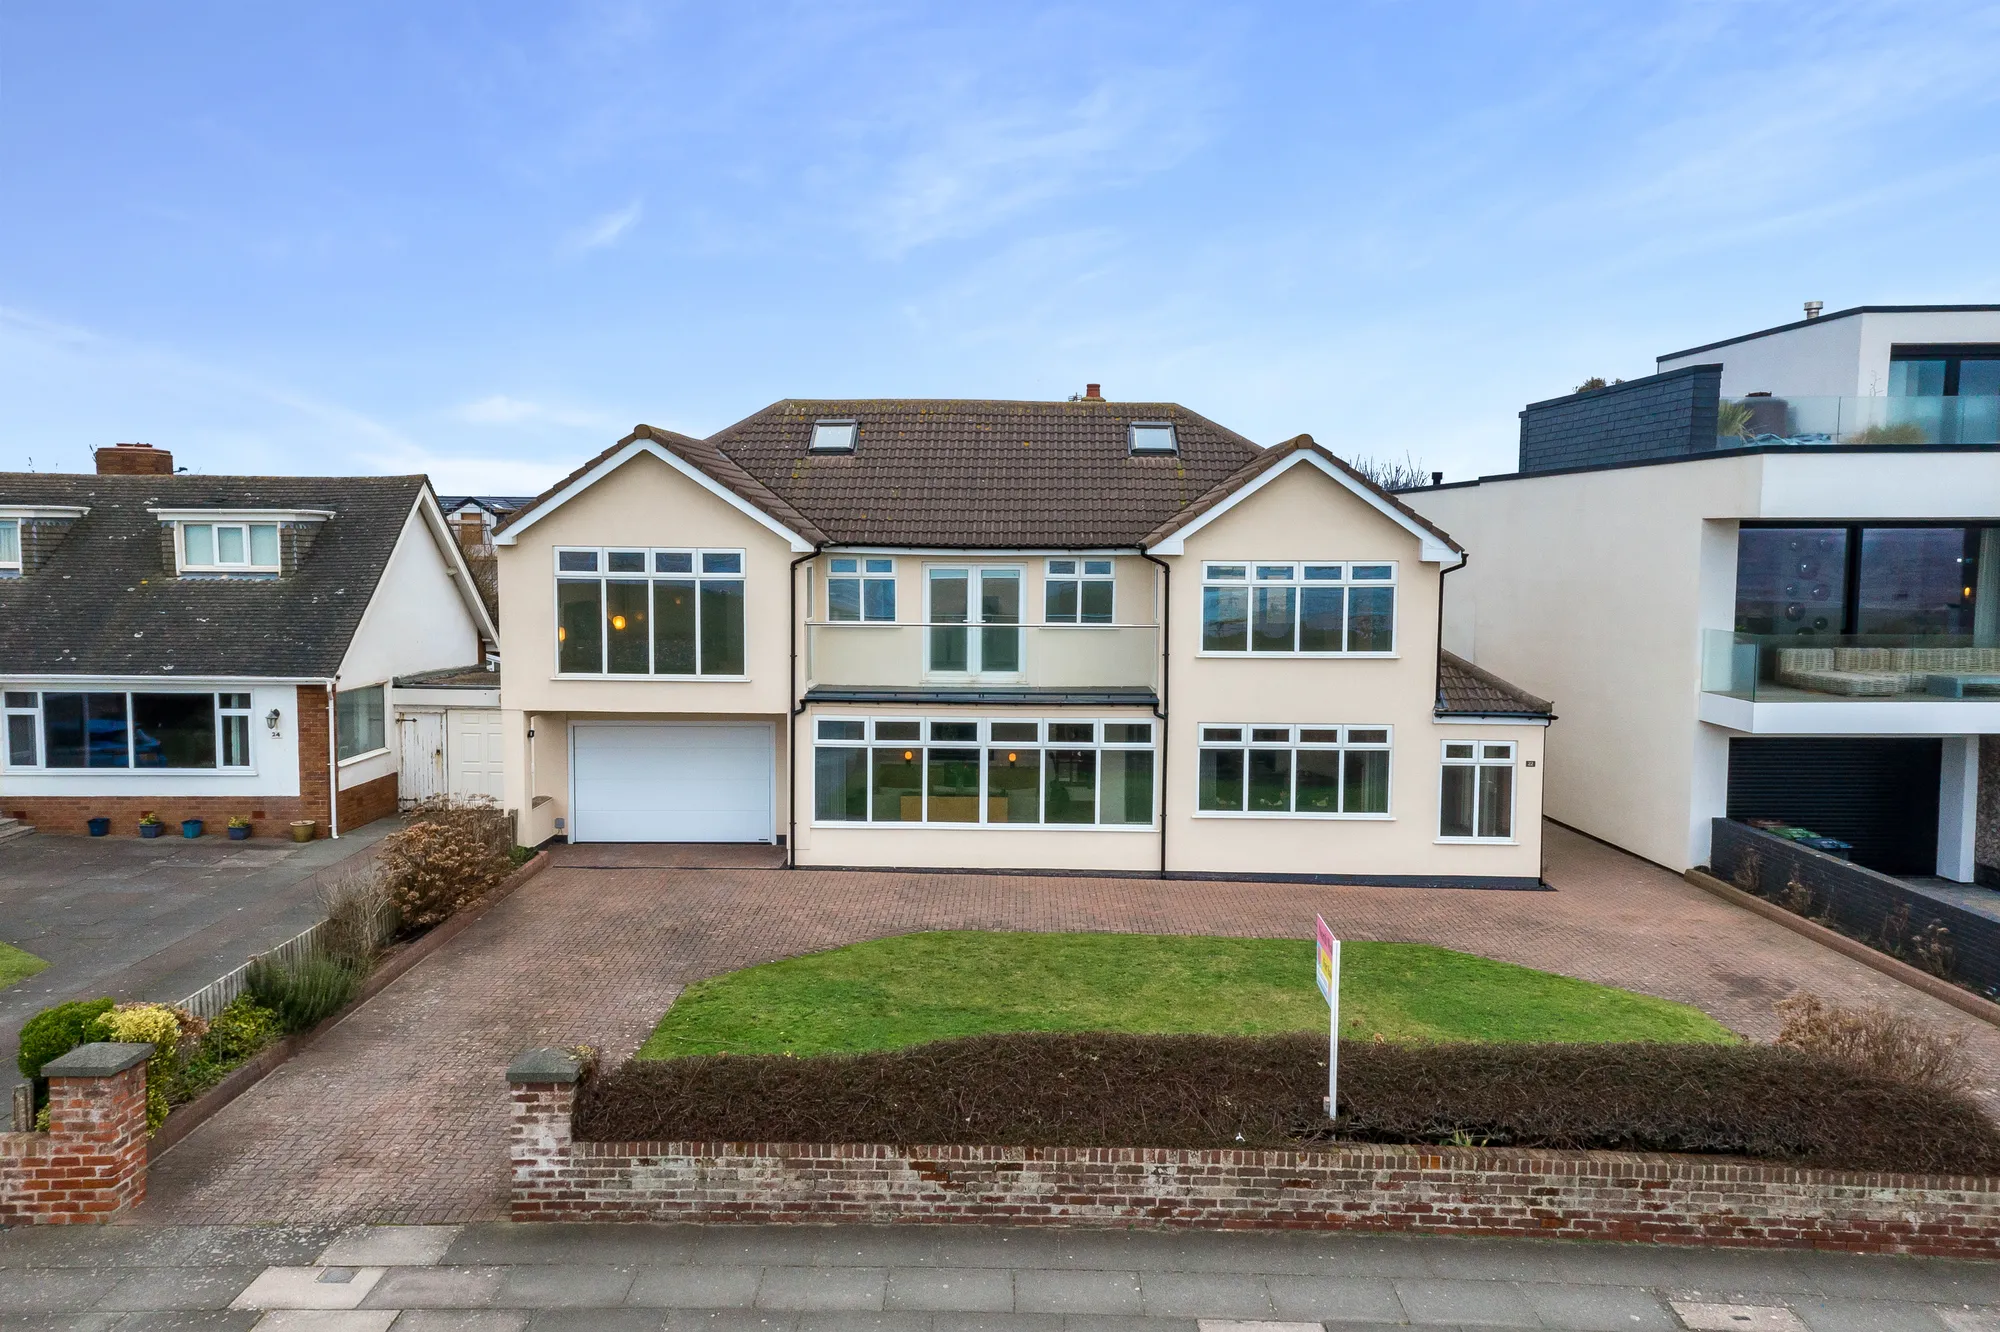 4 bed detached house for sale in Burbo Bank Road North, Liverpool - Property Image 1